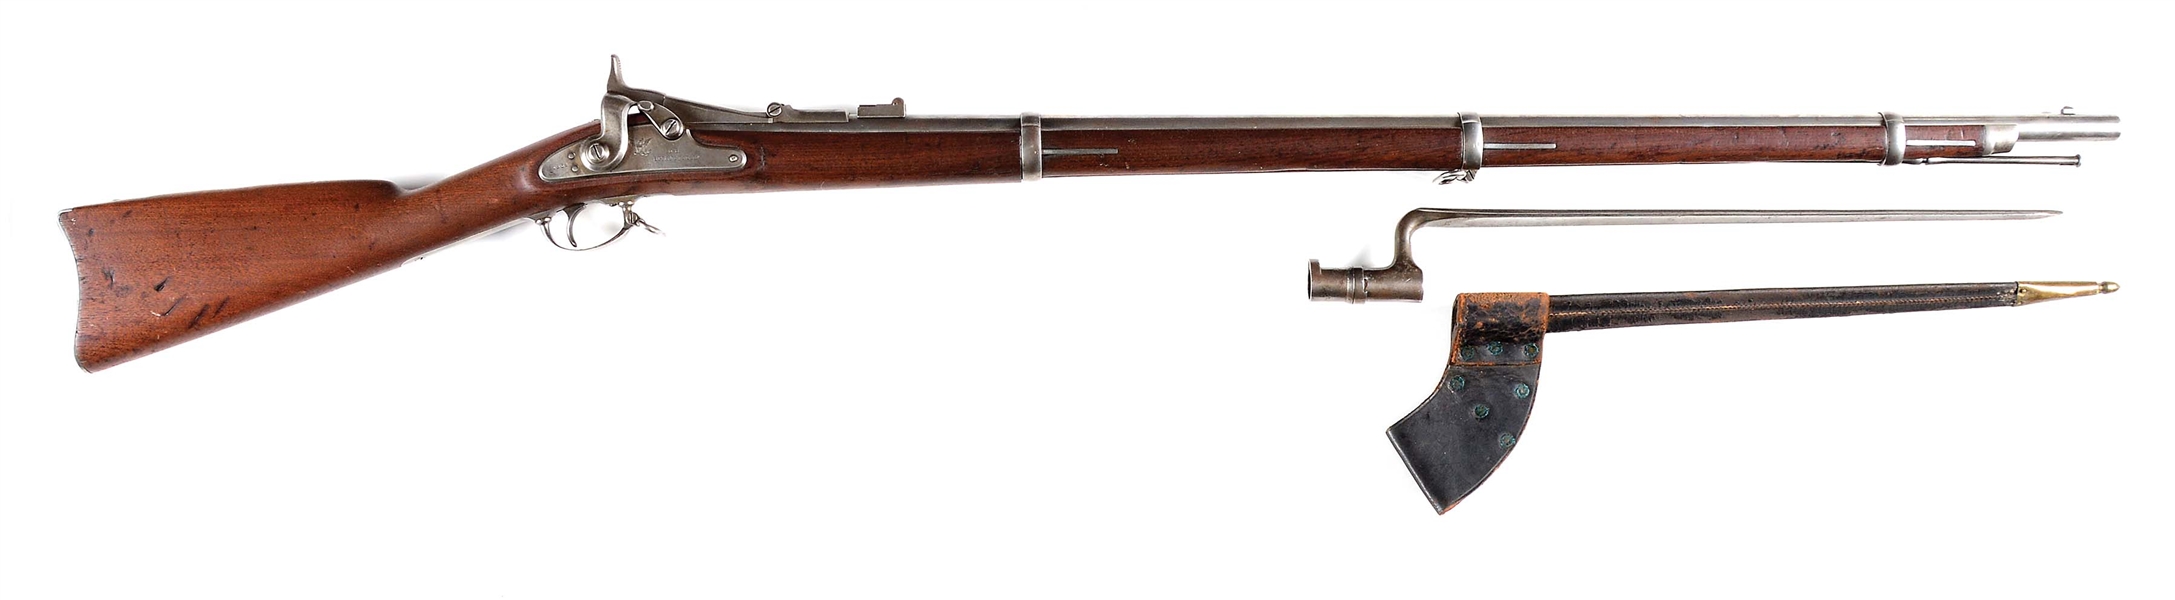 (A) US SPRINGFIELD 1866 SECOND ALLIN CONVERSION RIFLE WITH BAYONET.